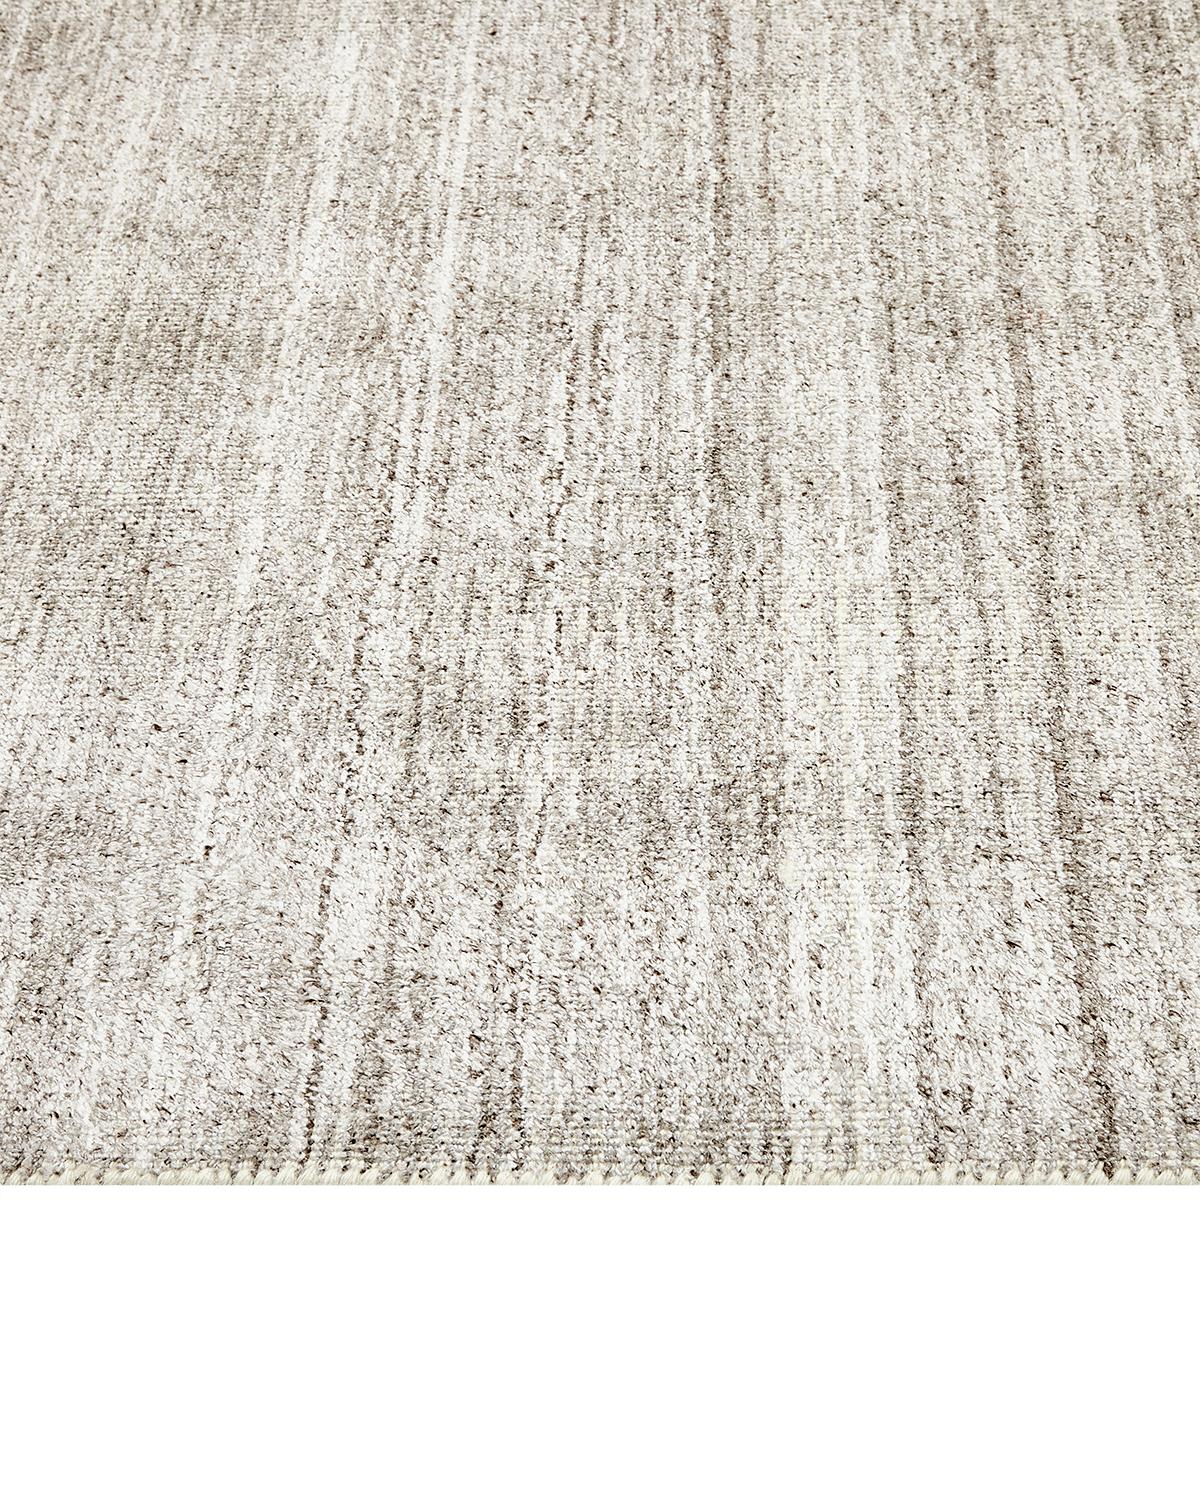 Modern Solo Rugs Halsey Contemporary Striped Handmade Area Rug Beige For Sale